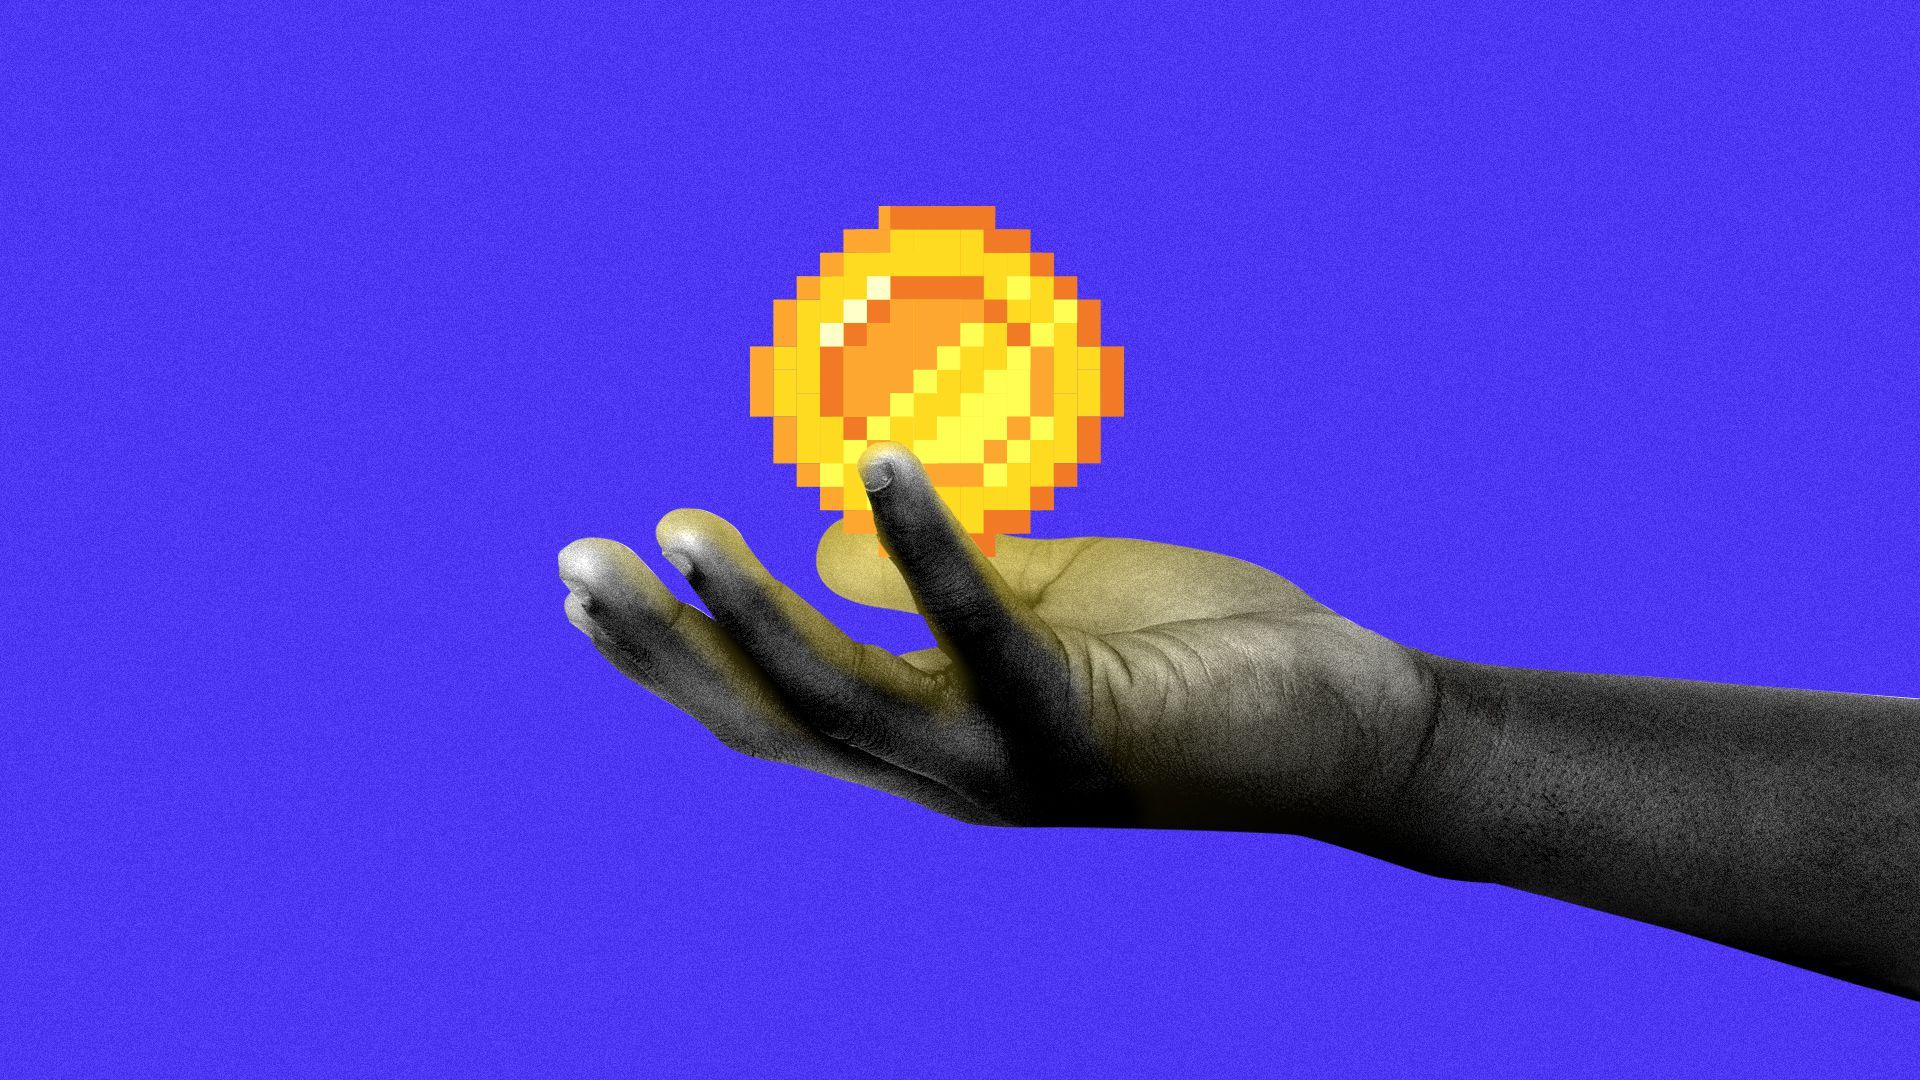 Animated illustration of a hand holding a rotating glowing golden pixel coin.